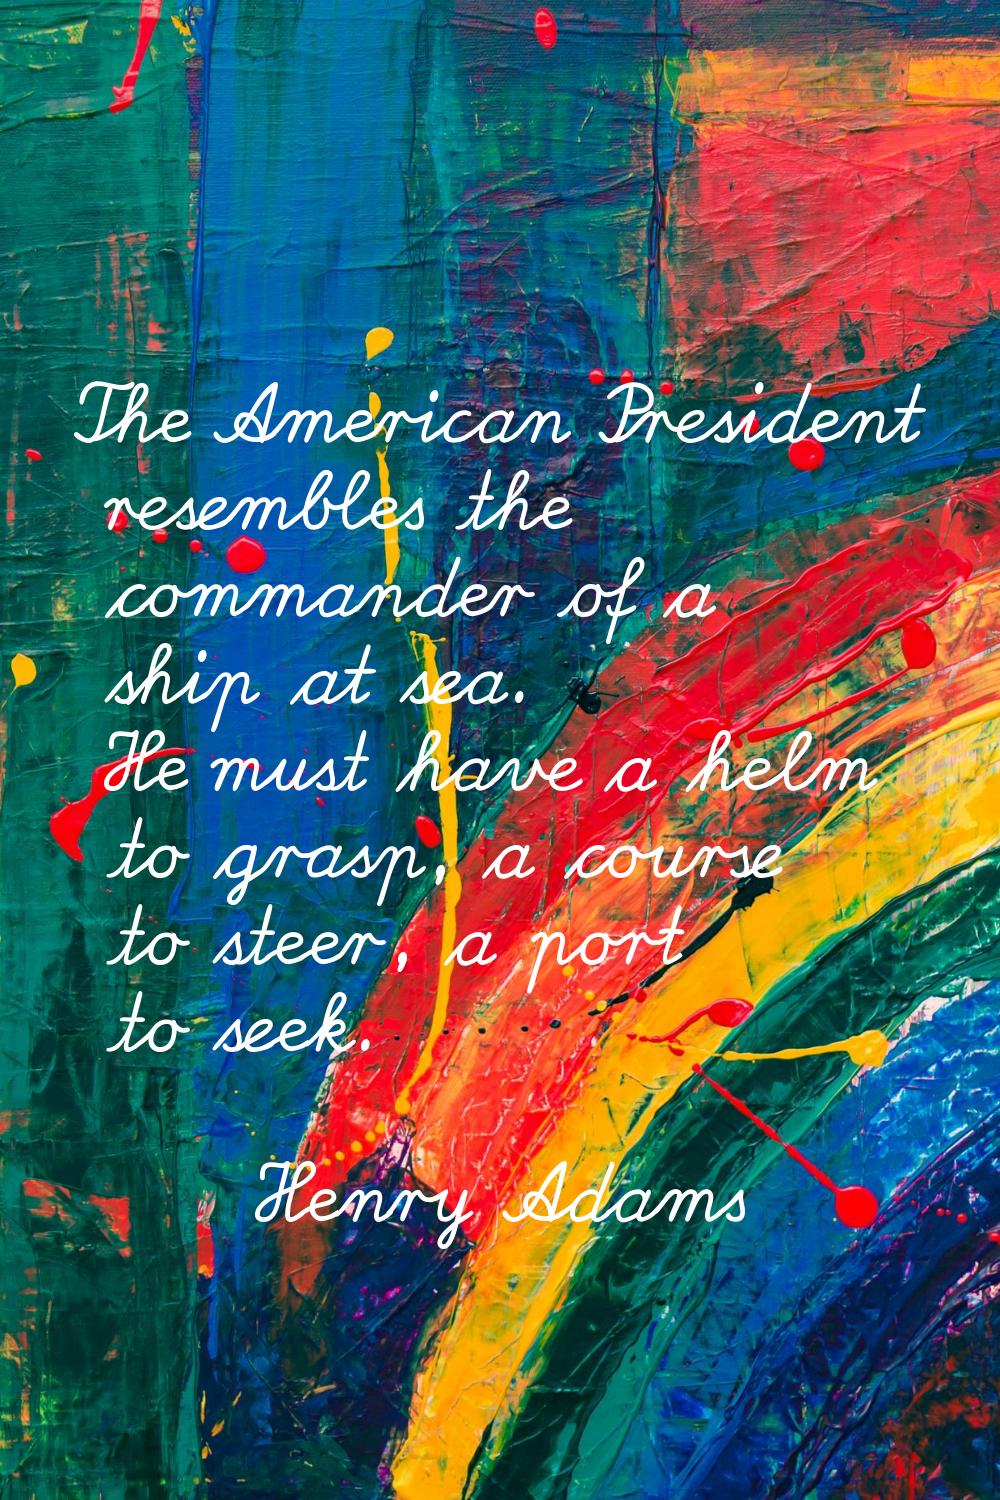 The American President resembles the commander of a ship at sea. He must have a helm to grasp, a co